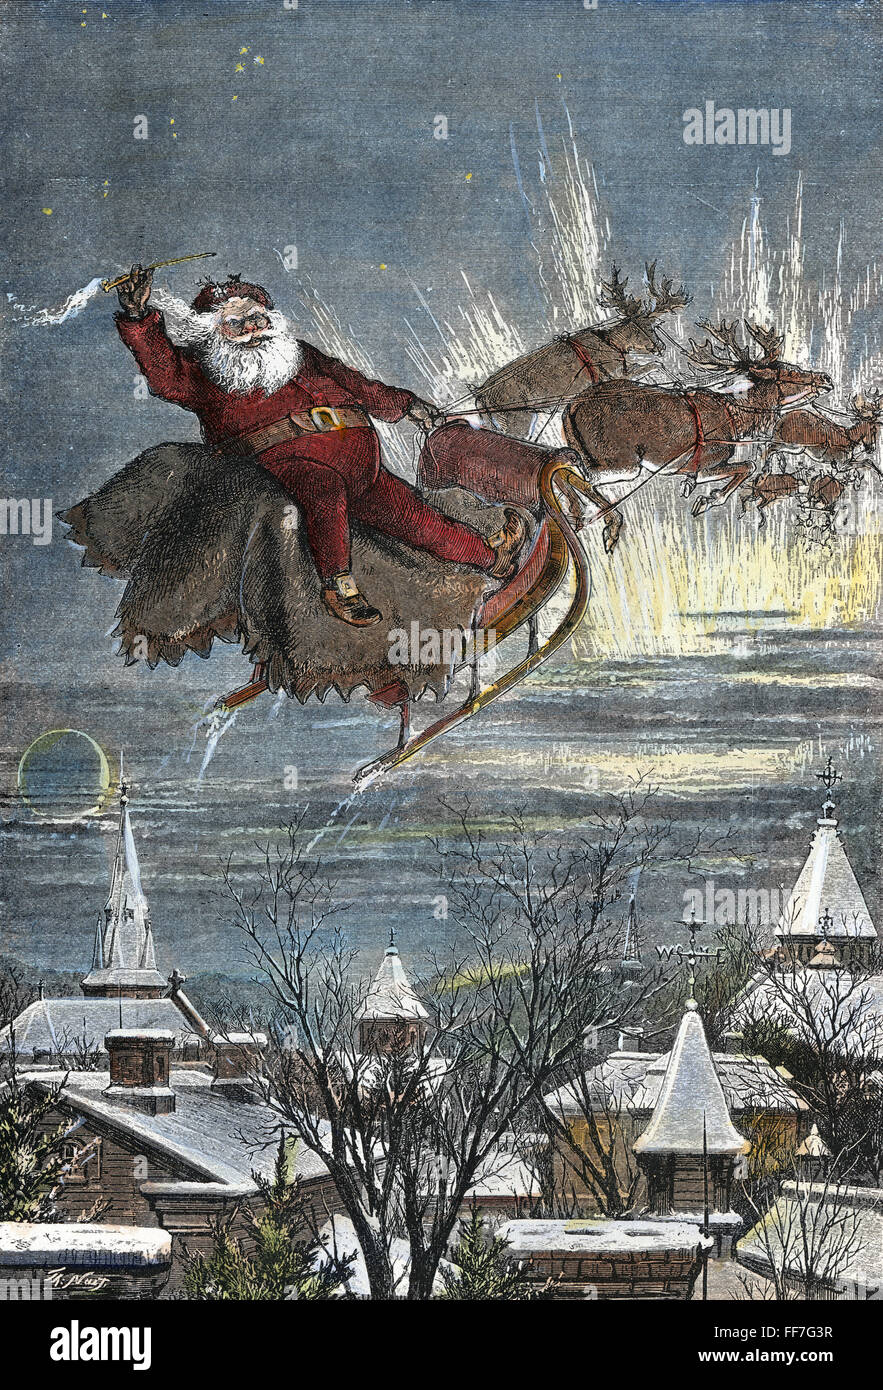 THOMAS NAST: SANTA CLAUS. /n'Merry Christmas to all, and to all a good night.' Engraving by Thomas Nast. Stock Photo